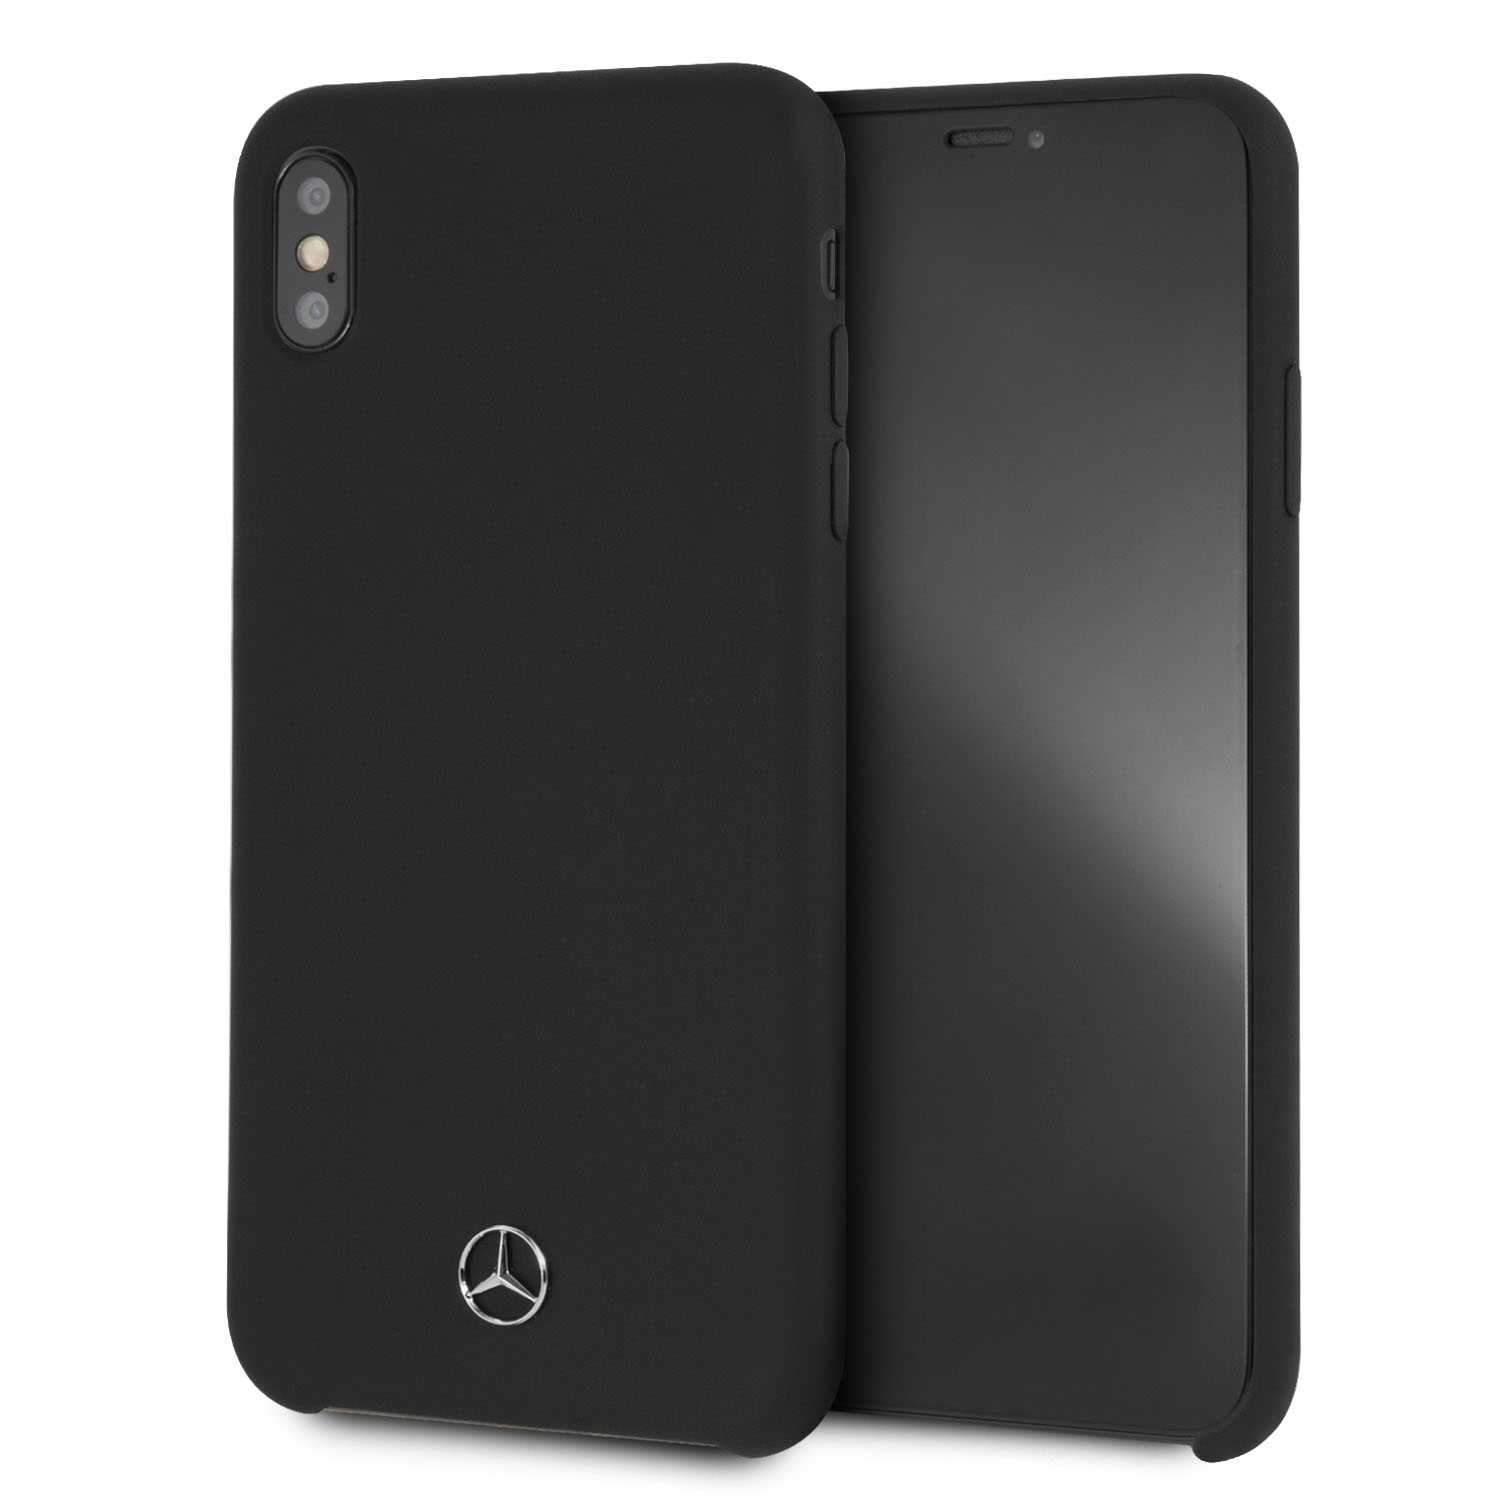 Mercedes-Benz mercedes benz silicon case with microfiber lining for iphone xs max black